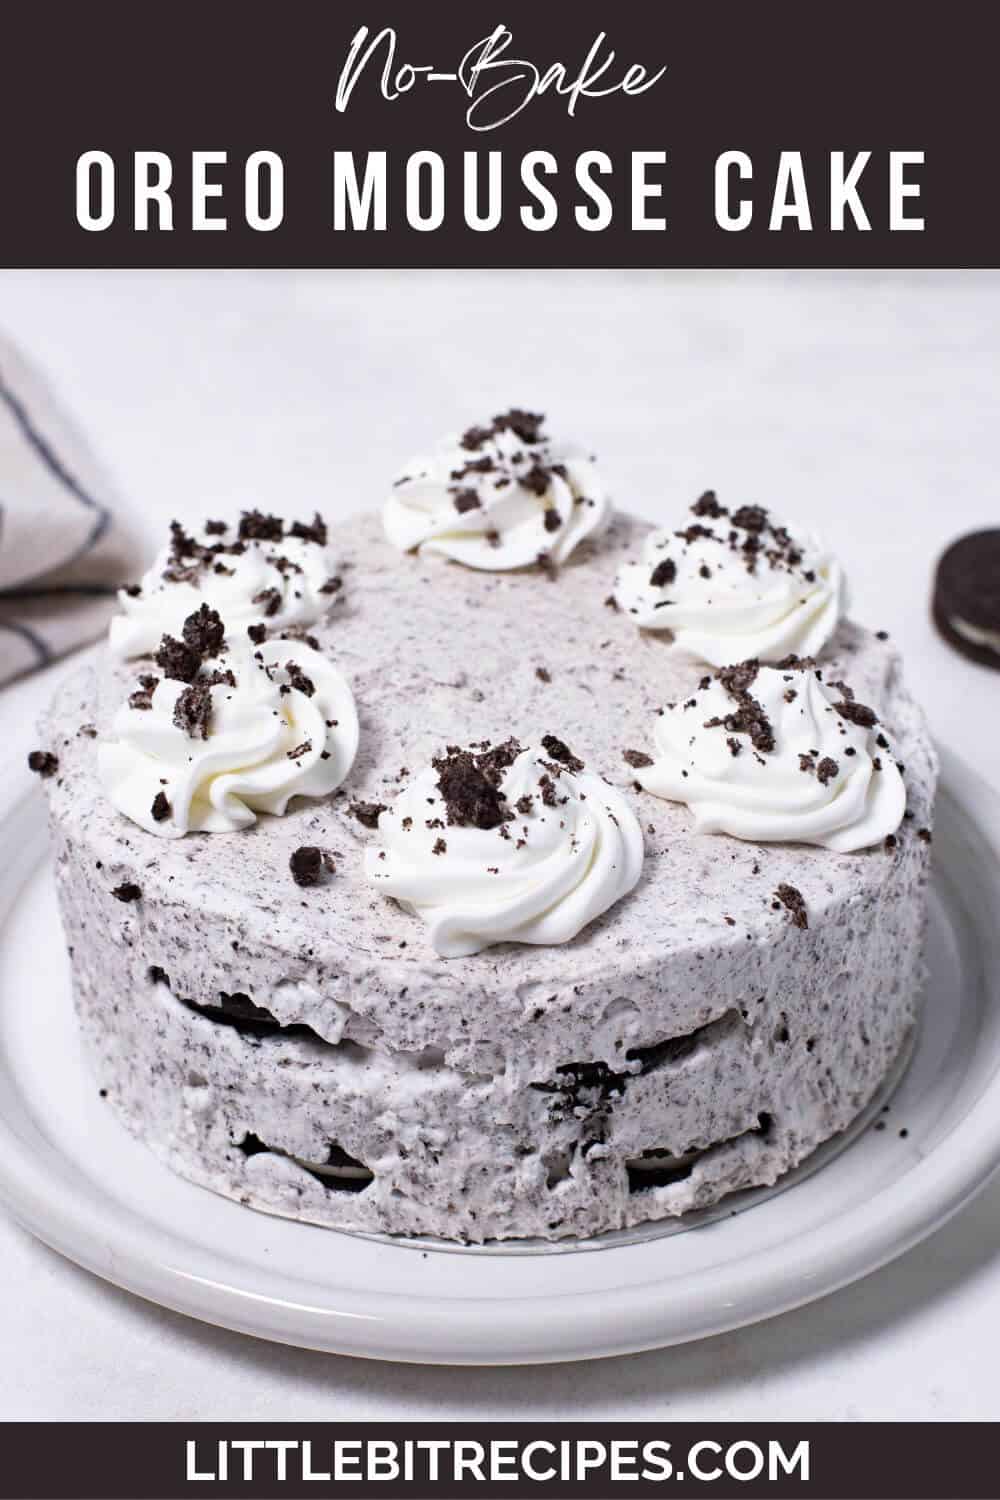 oreo mousse cake with text.